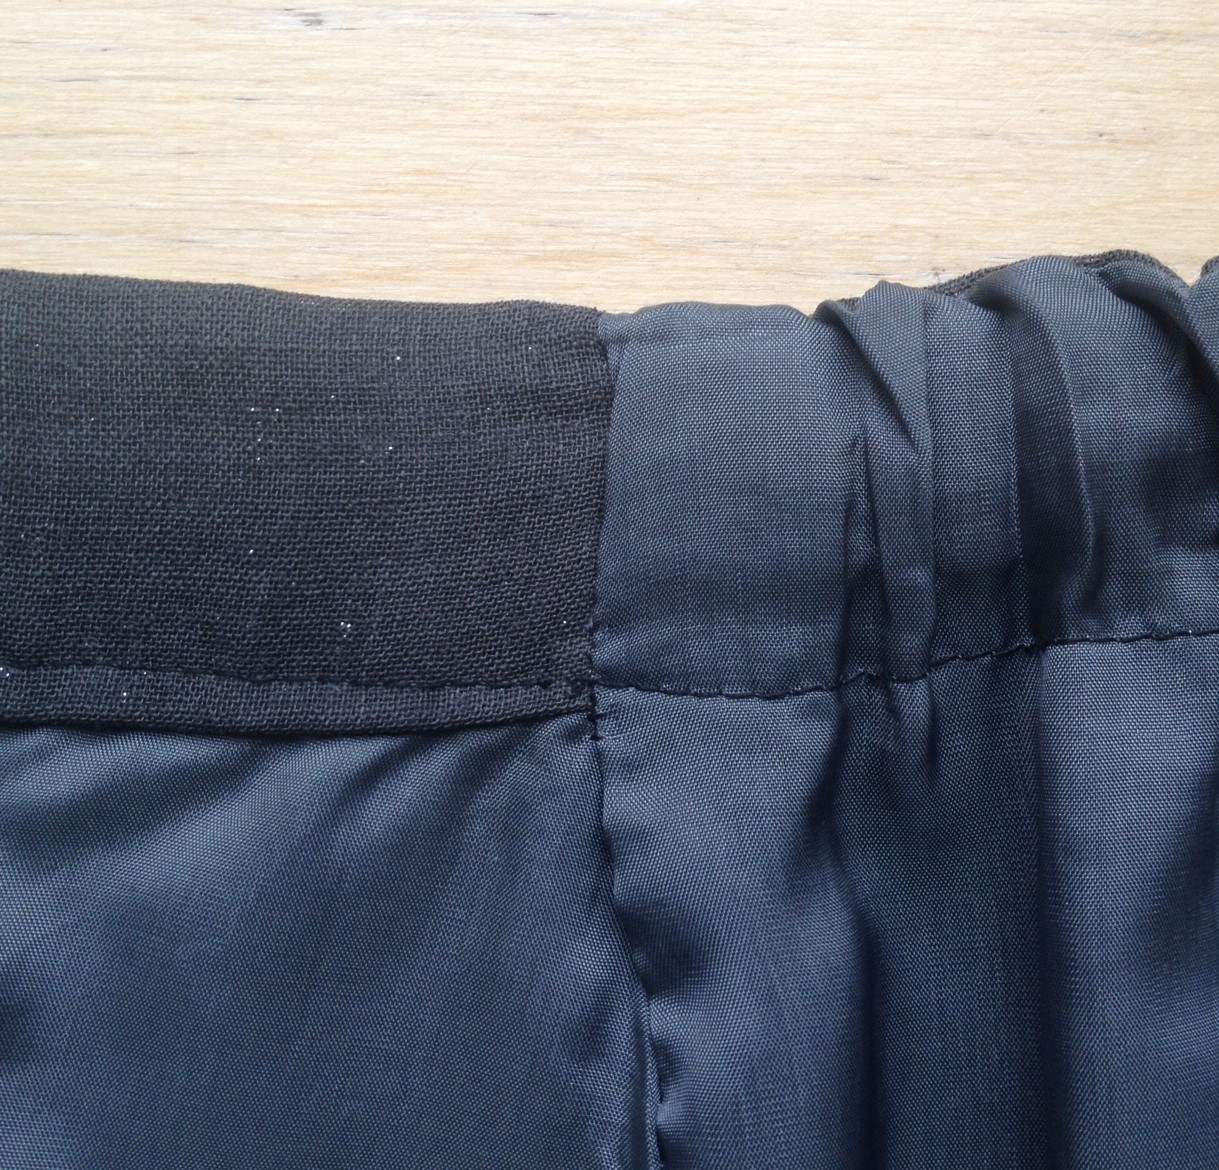 Topic: Adding a Lining to the Everyday Skirt =) | Discuss | Oliver + S